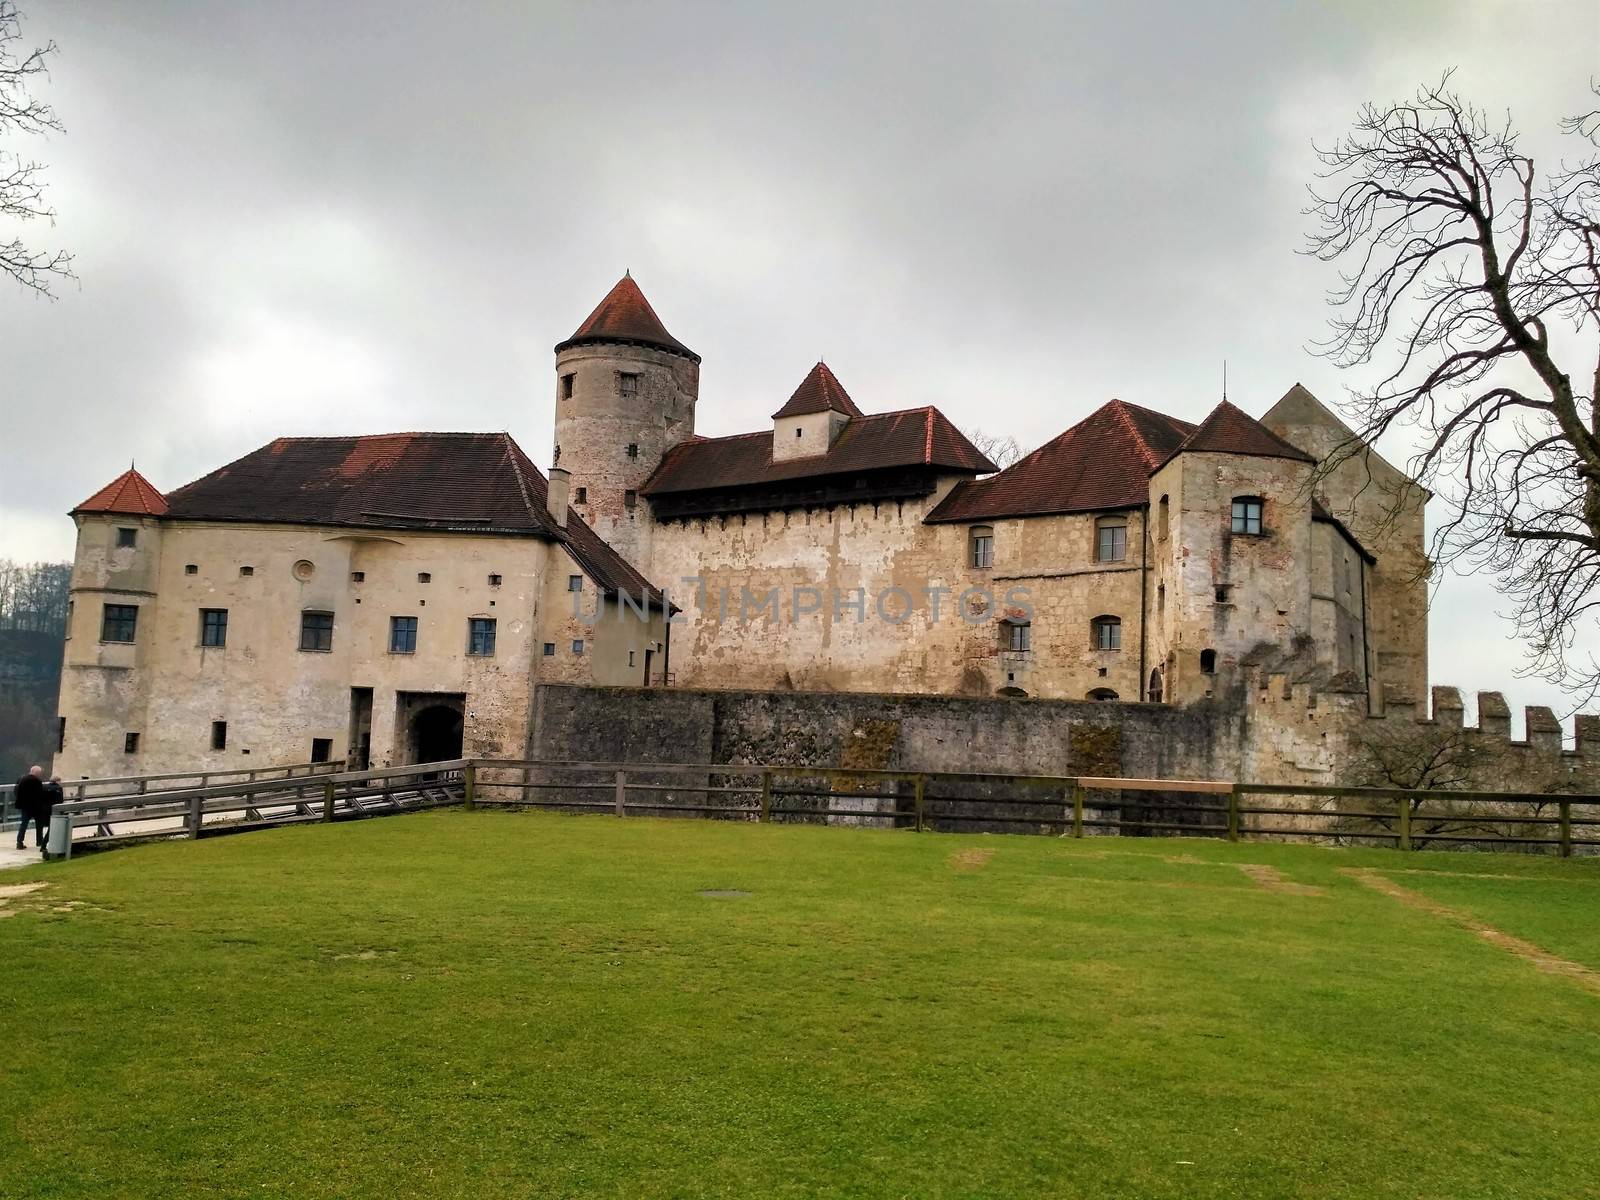 Castle Burghausen on rainy day with tree and meadow